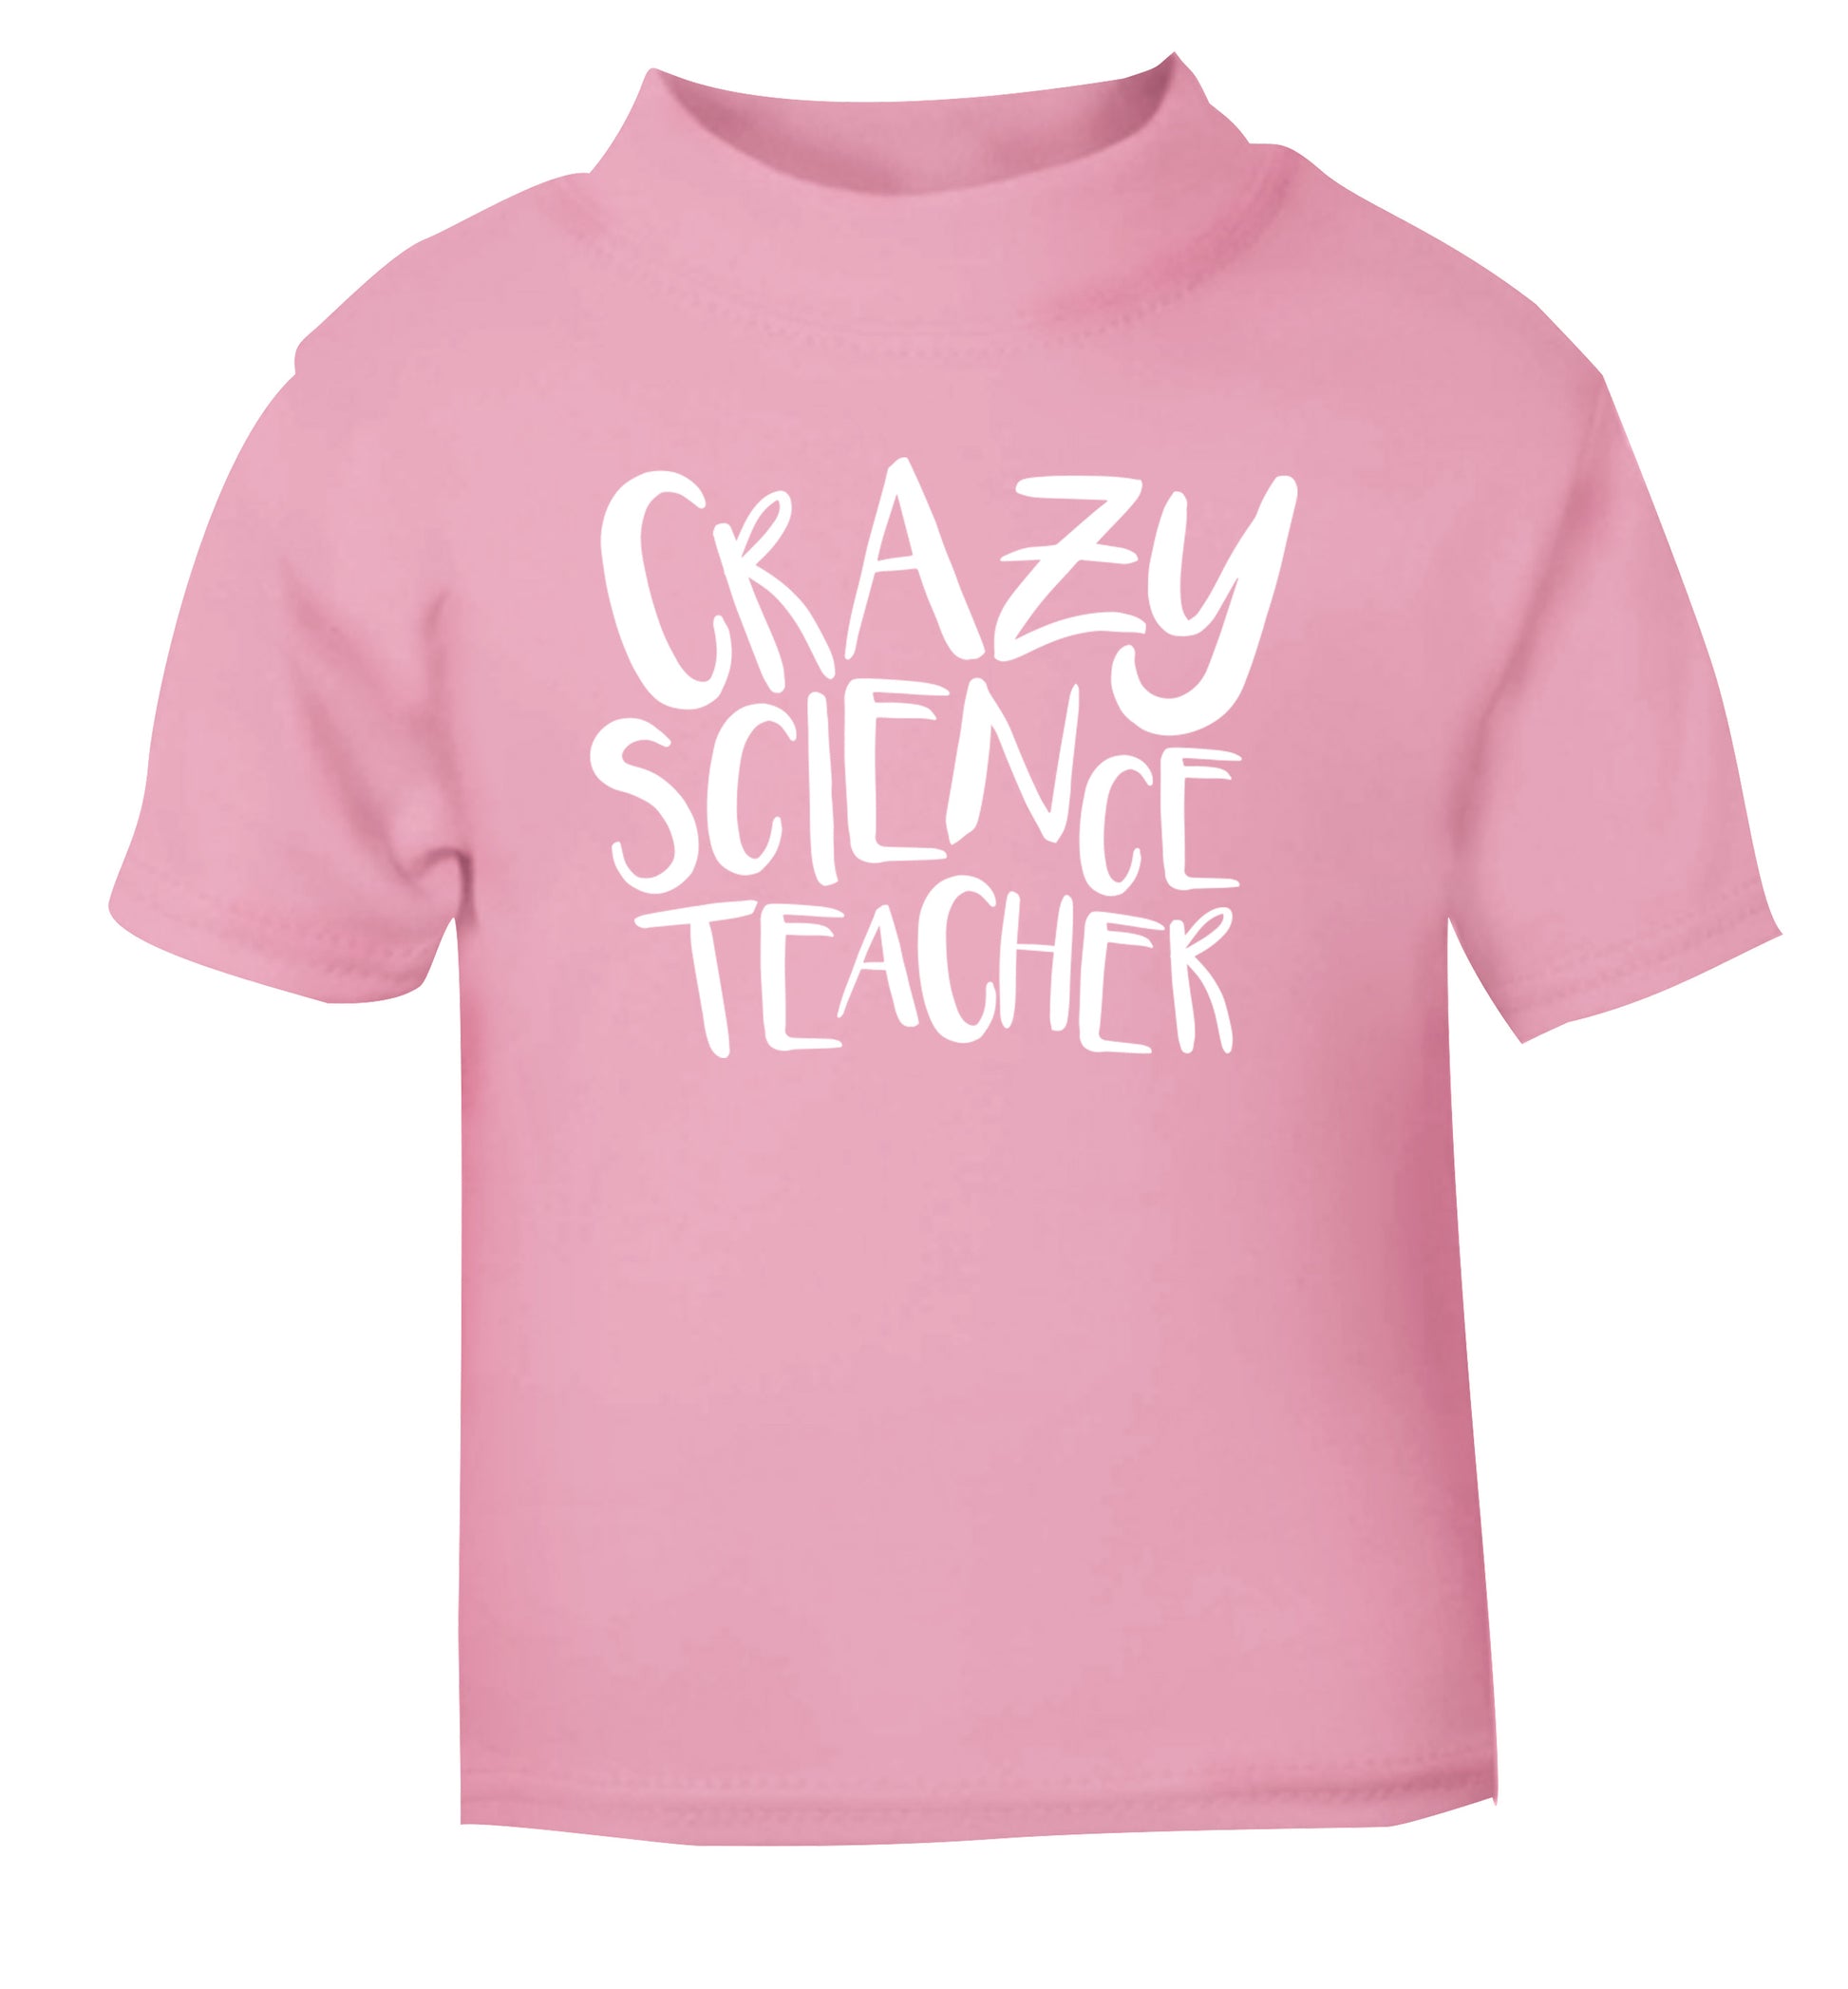 Crazy science teacher light pink Baby Toddler Tshirt 2 Years